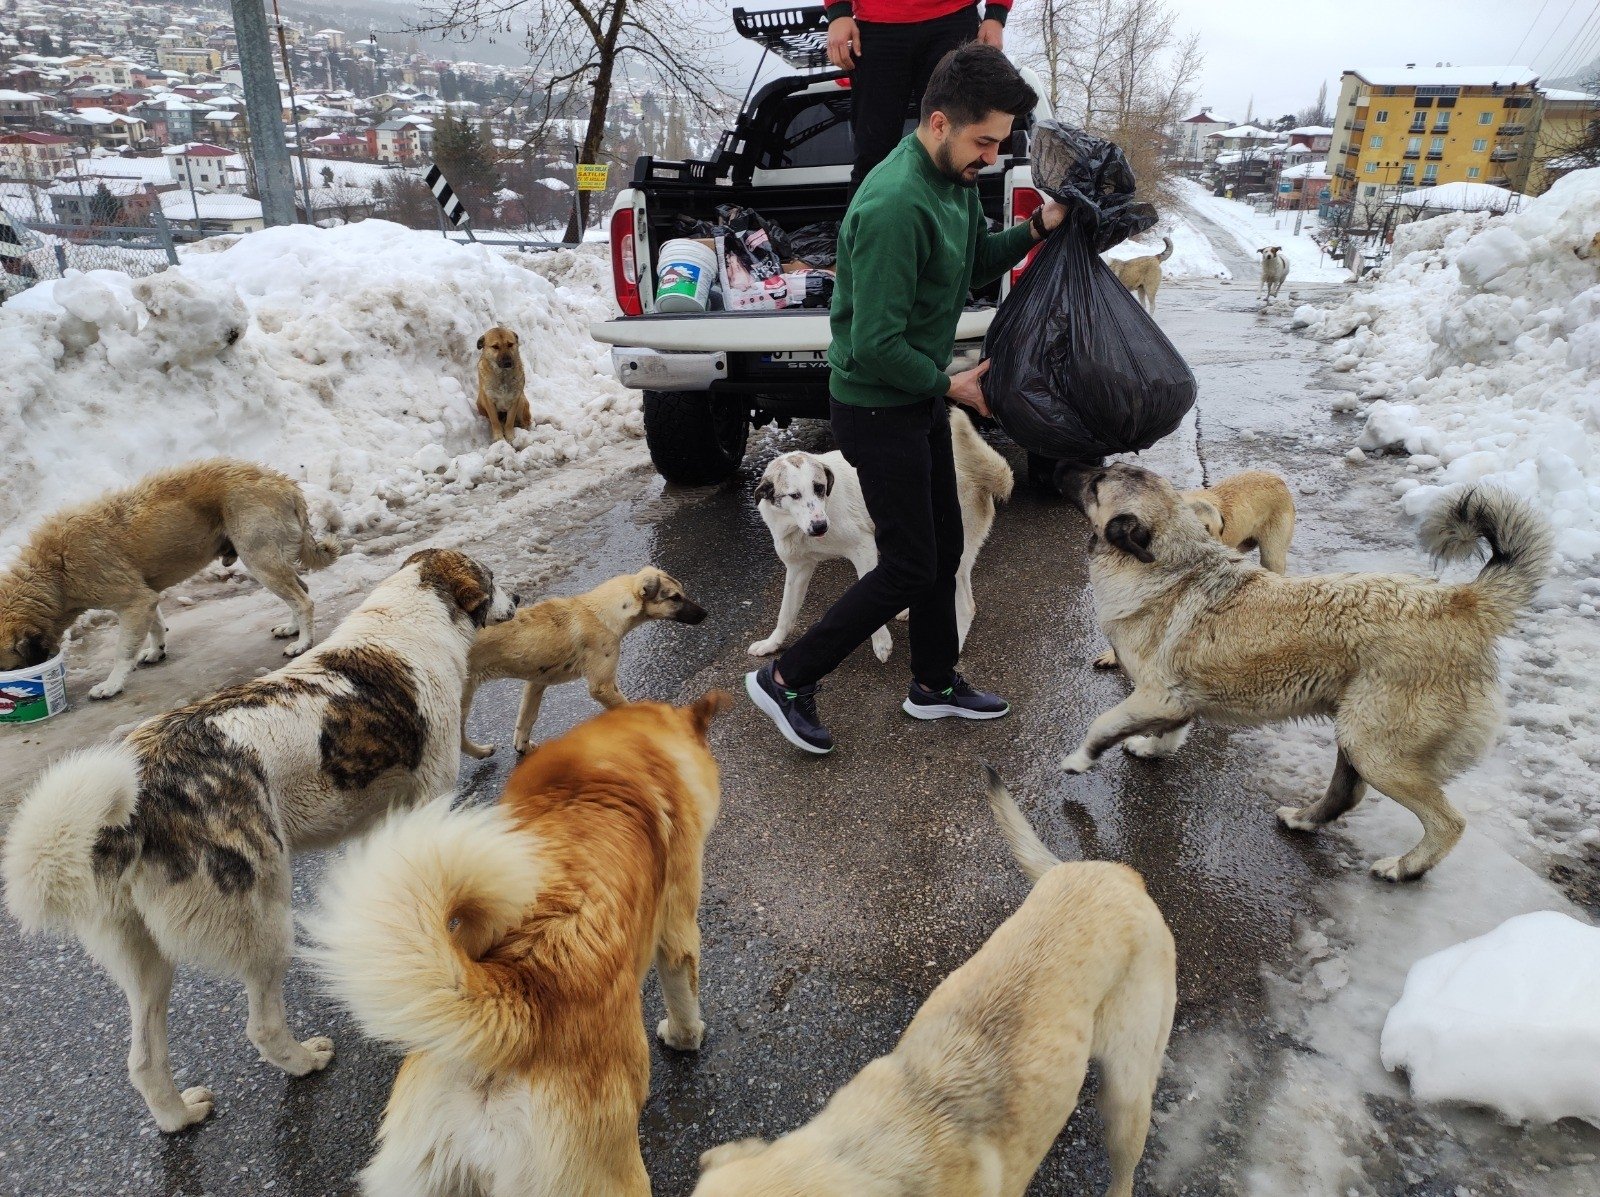 Turkey ups safety efforts for both stray animals and citizens | Daily Sabah